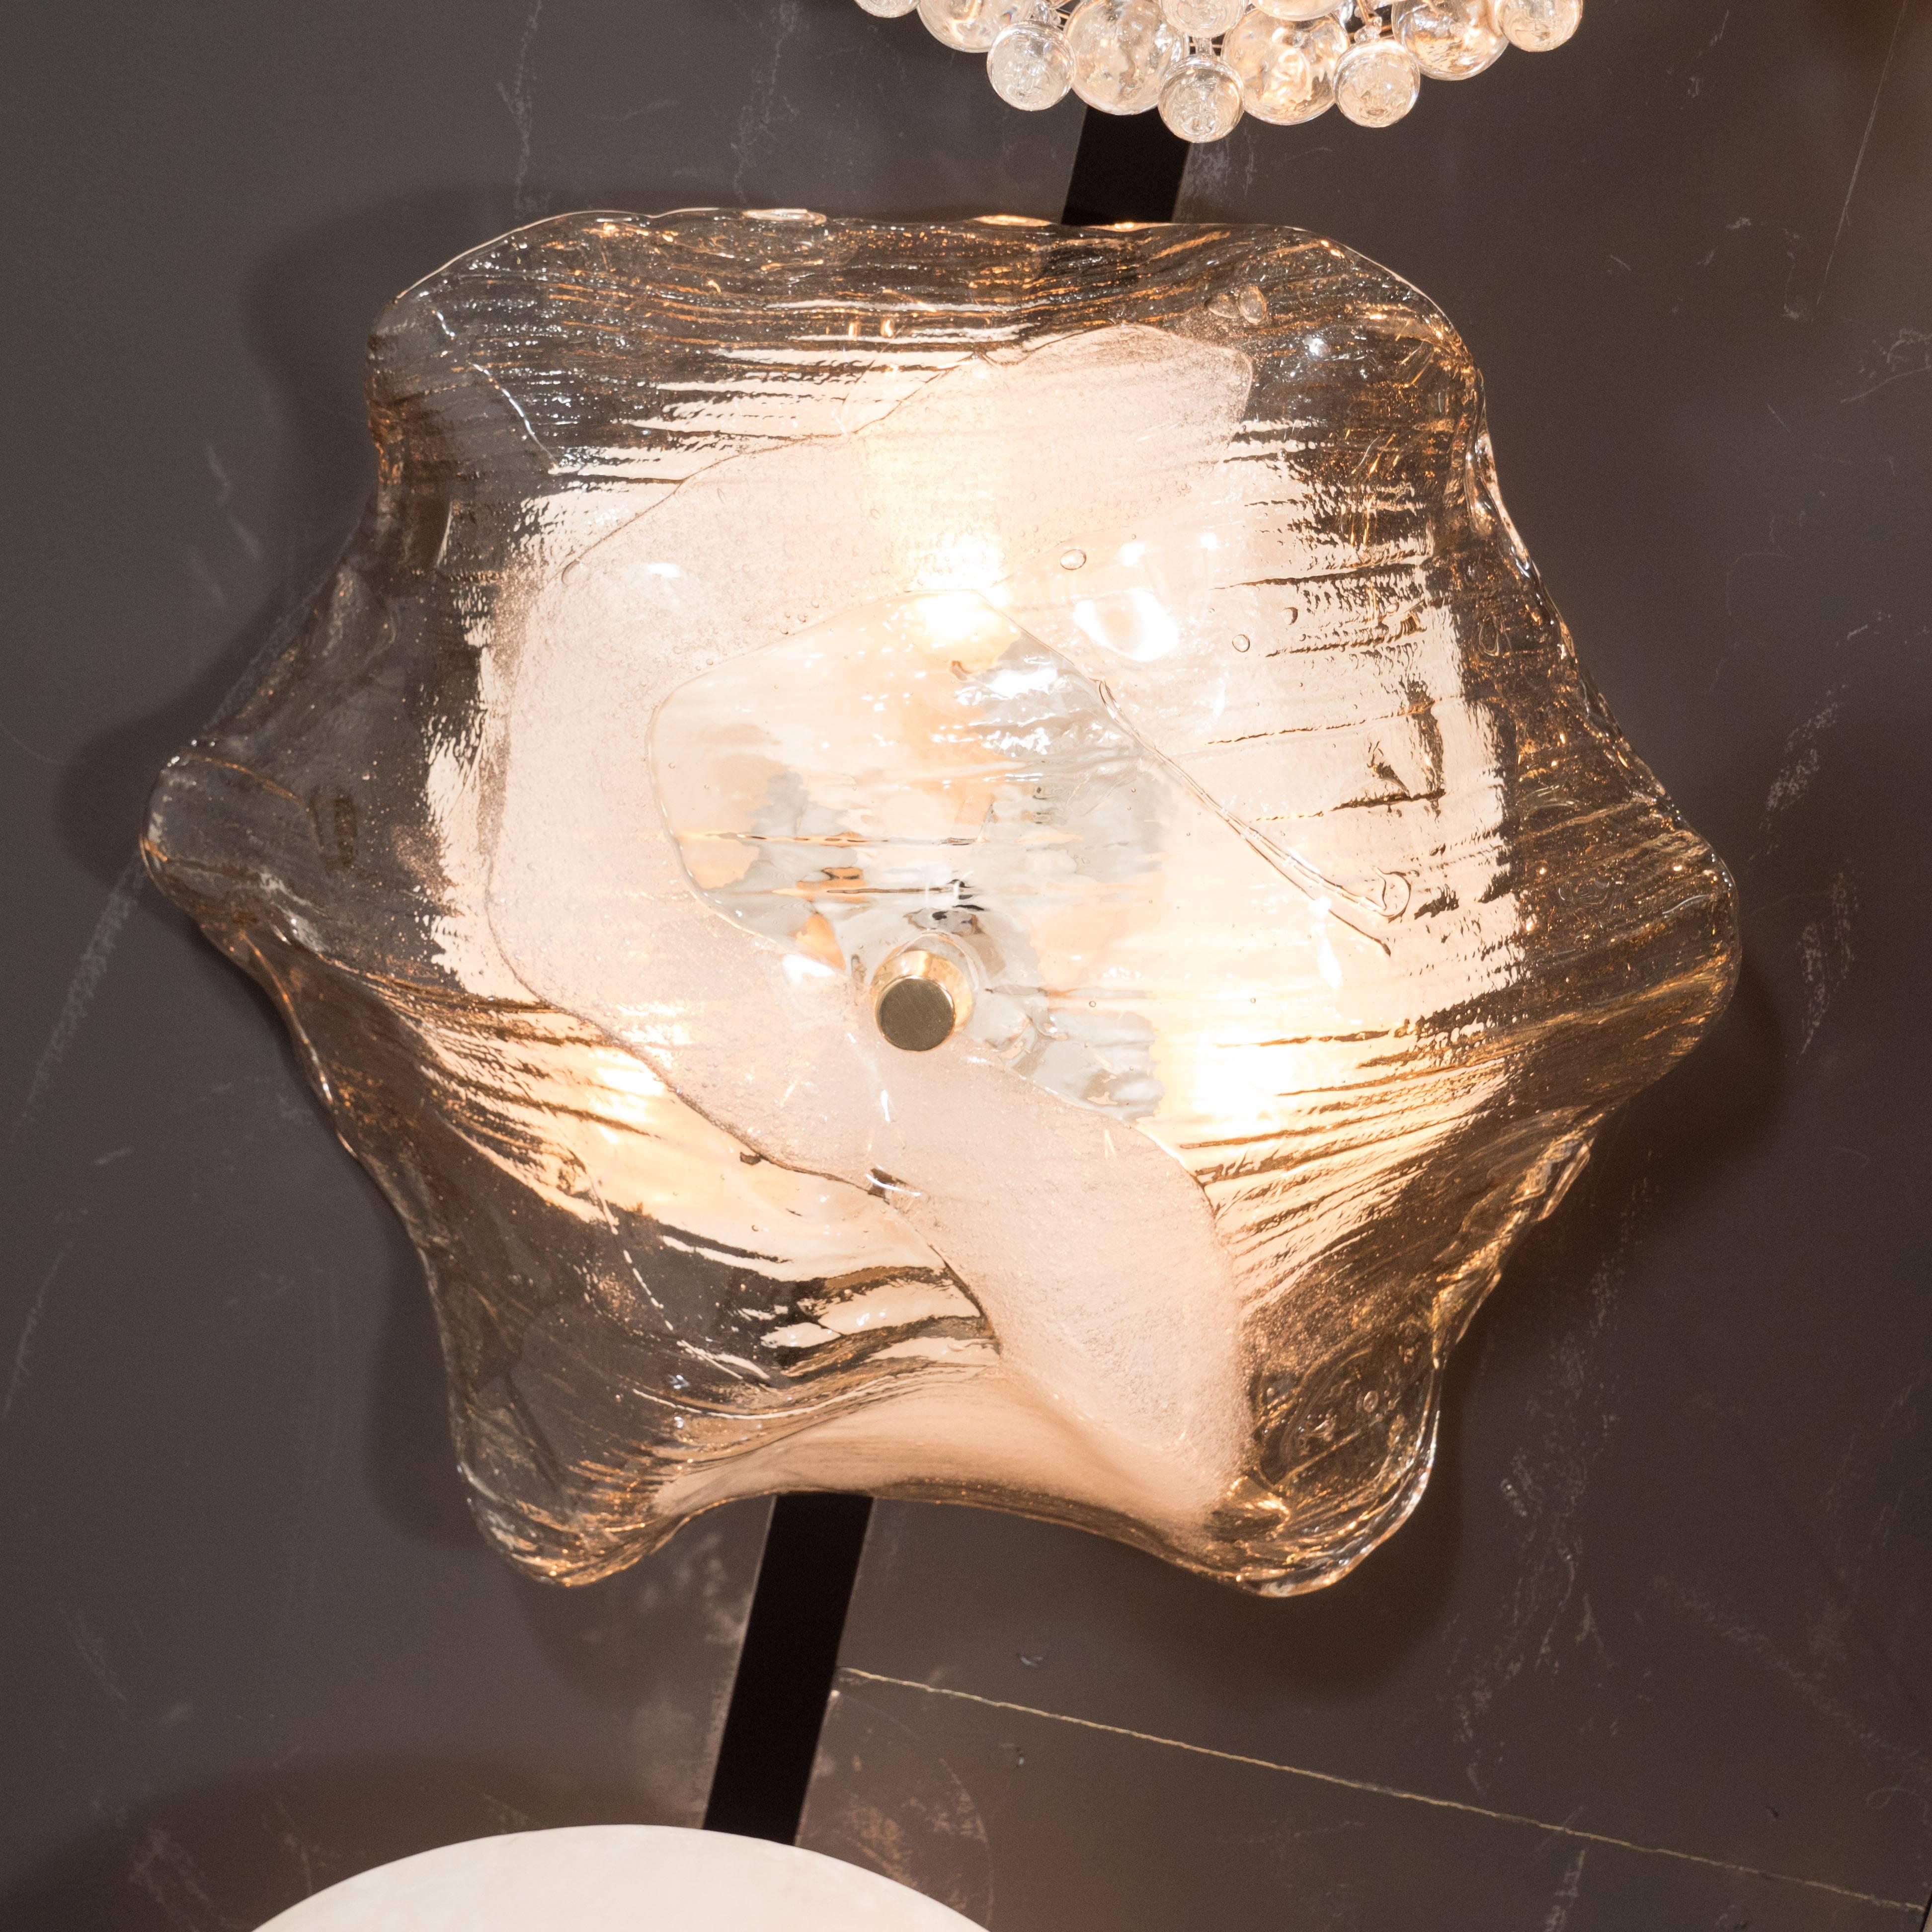 This sophisticated handblown Mid-Century Modernist handblown glass flush mount is composed of translucent smoked glass with a subtle striated pattern, effervescent bubbles, and a s-shaped embellishment in opaque white glass. It was produced in